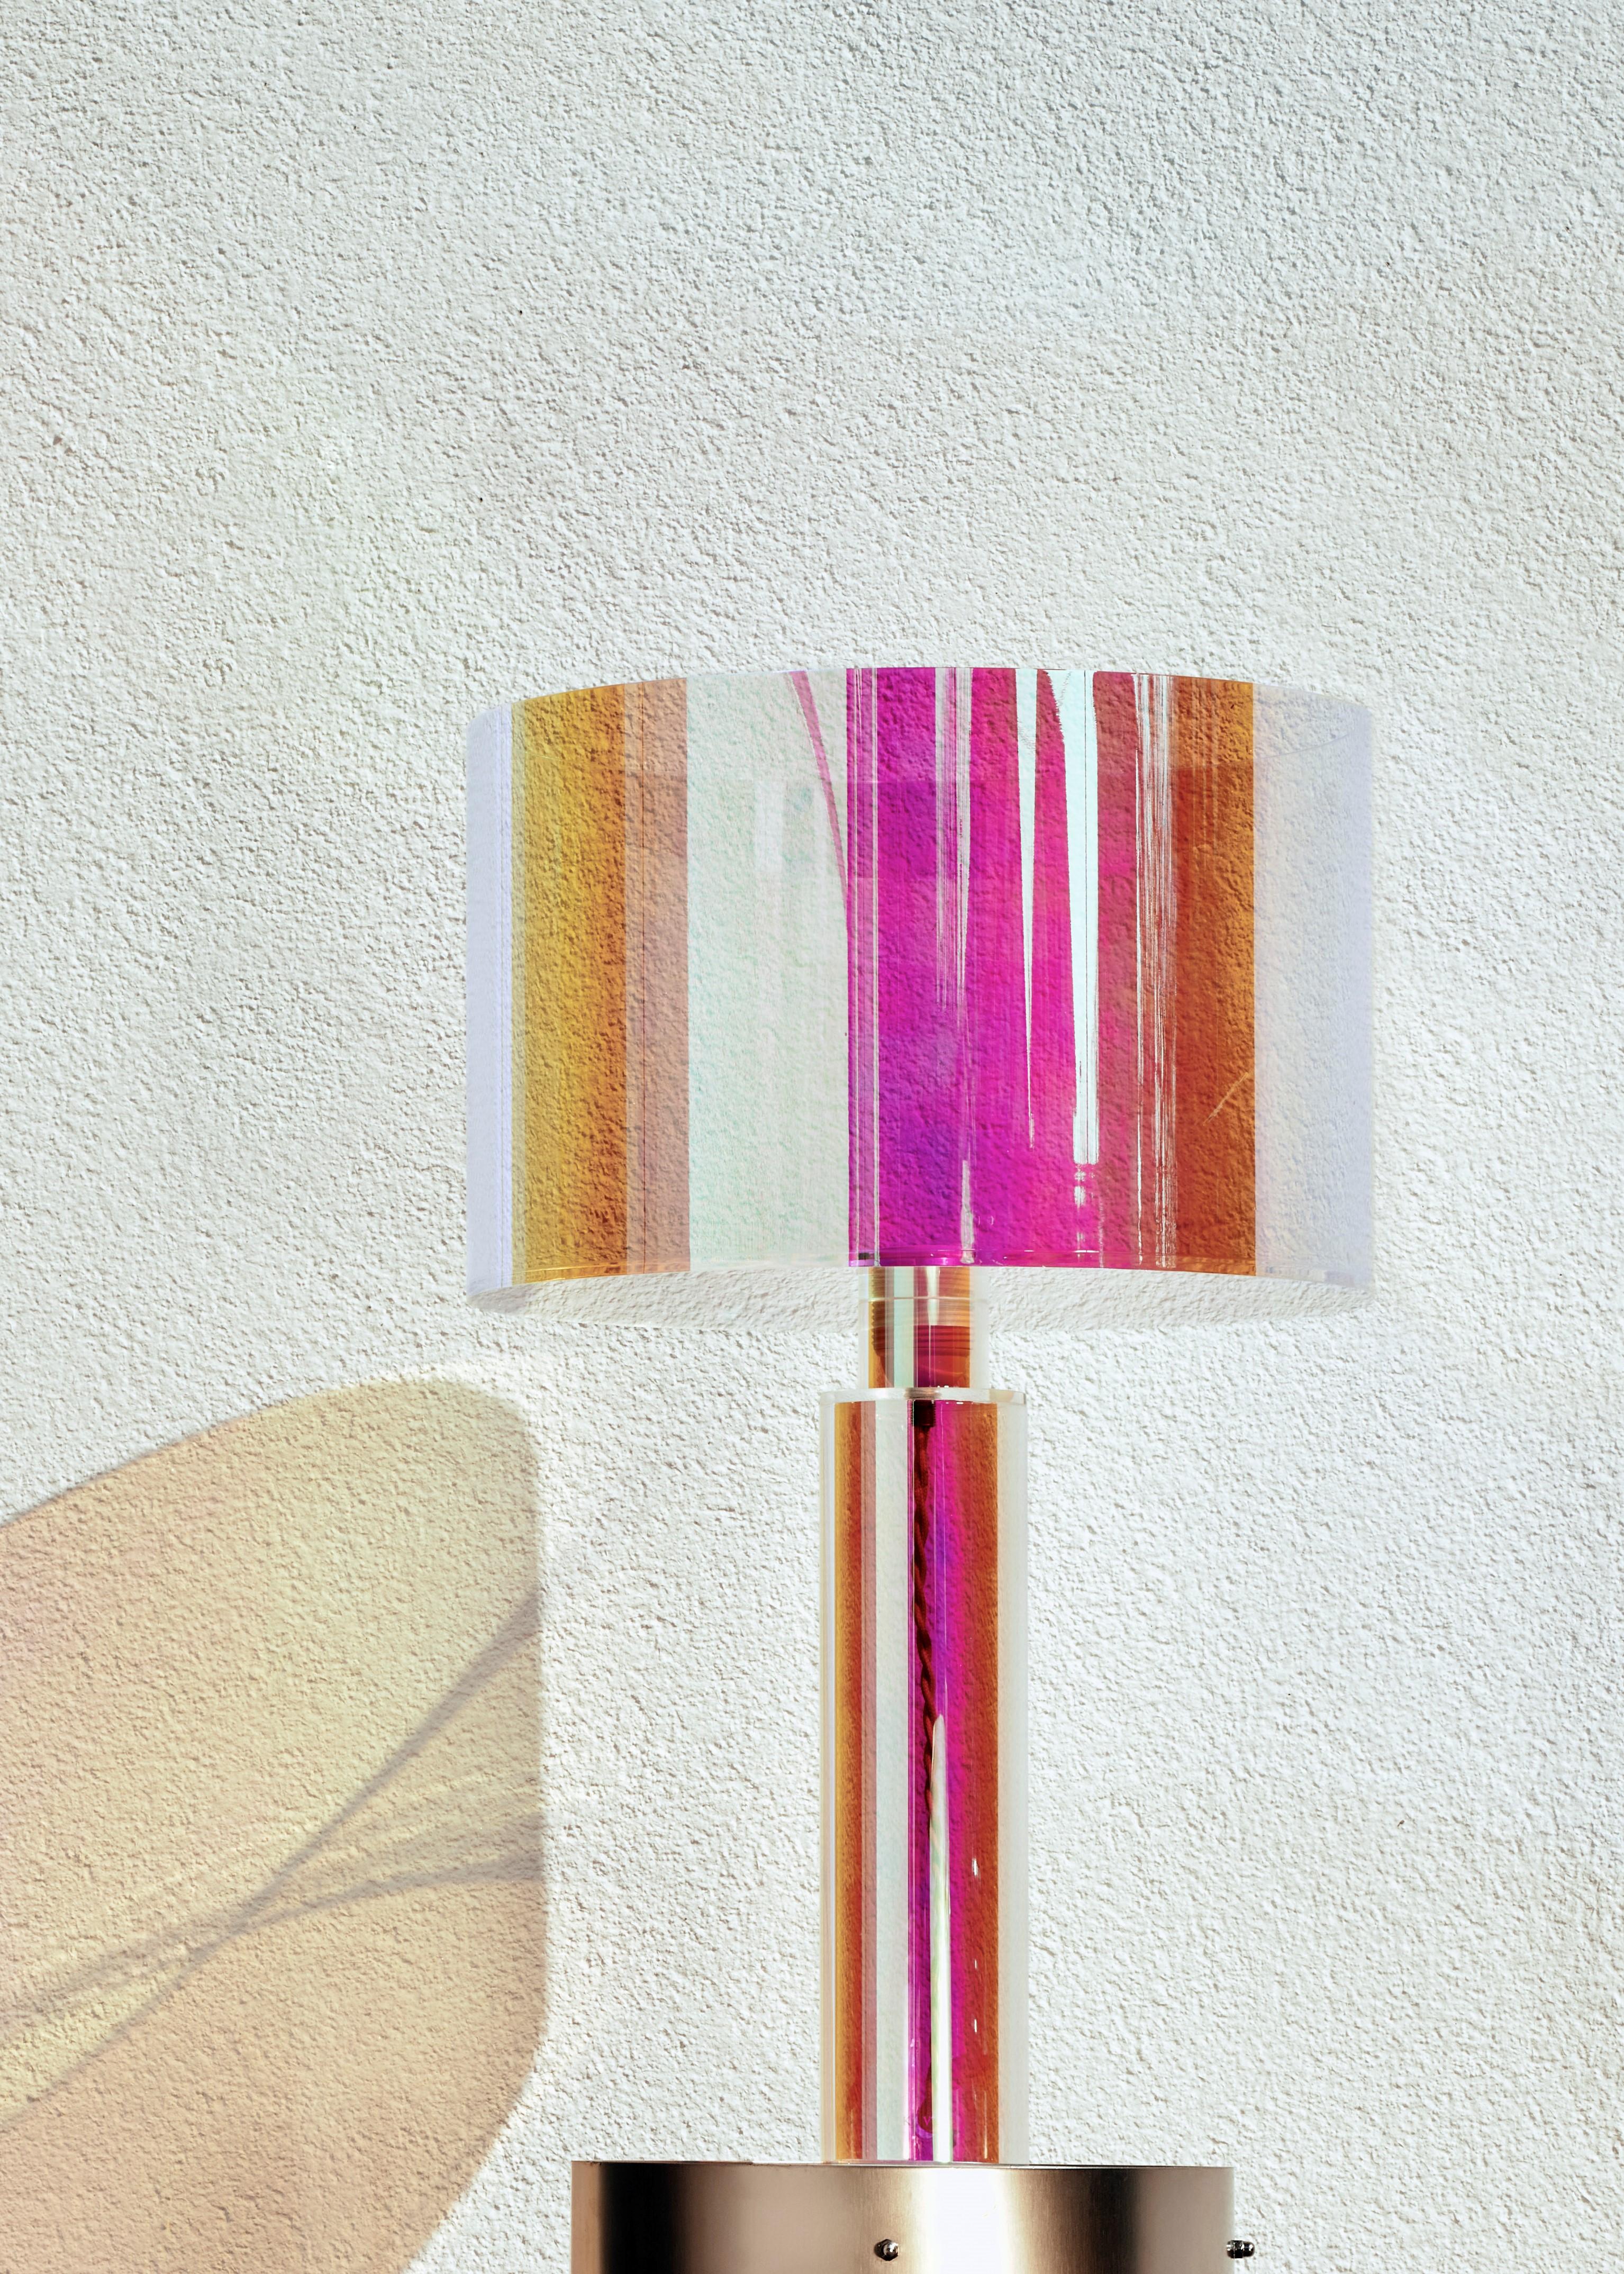 Miami pink table lamp by Brajak Vitberg
Materials: Plexiglass, Dichroic film
Dimensions: 55 x 35 cm

 Minnor bubbles can appear since this is a custom made product.

Bijelic and Brajak are two architects from Ljubljana, Slovenia.
They are